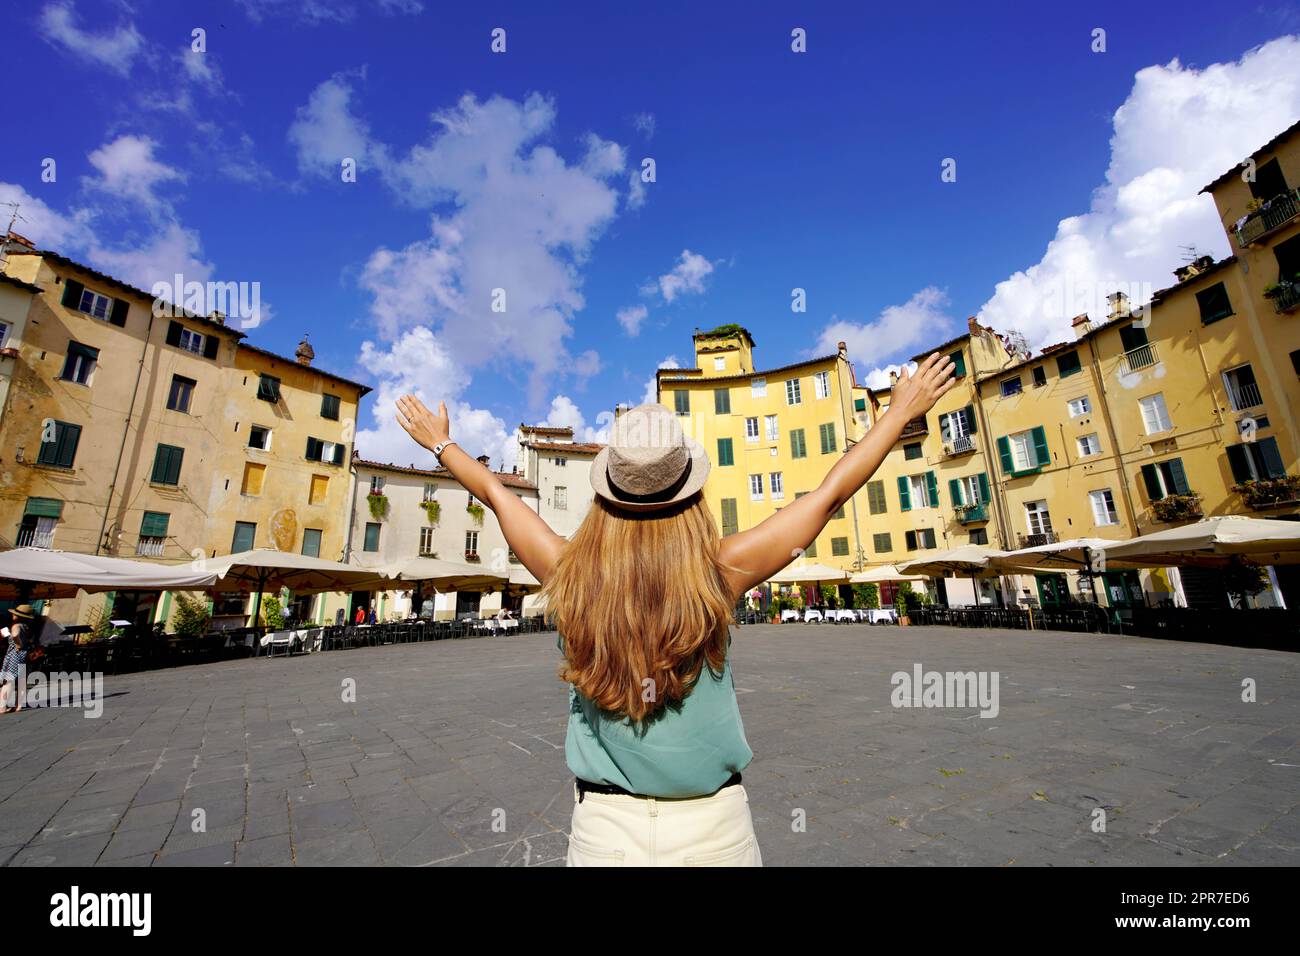 Holidays in Tuscany. Young tourist woman raising arms in the historic round square Piazza Anfiteatro in Lucca, Tuscany, Italy. Stock Photo